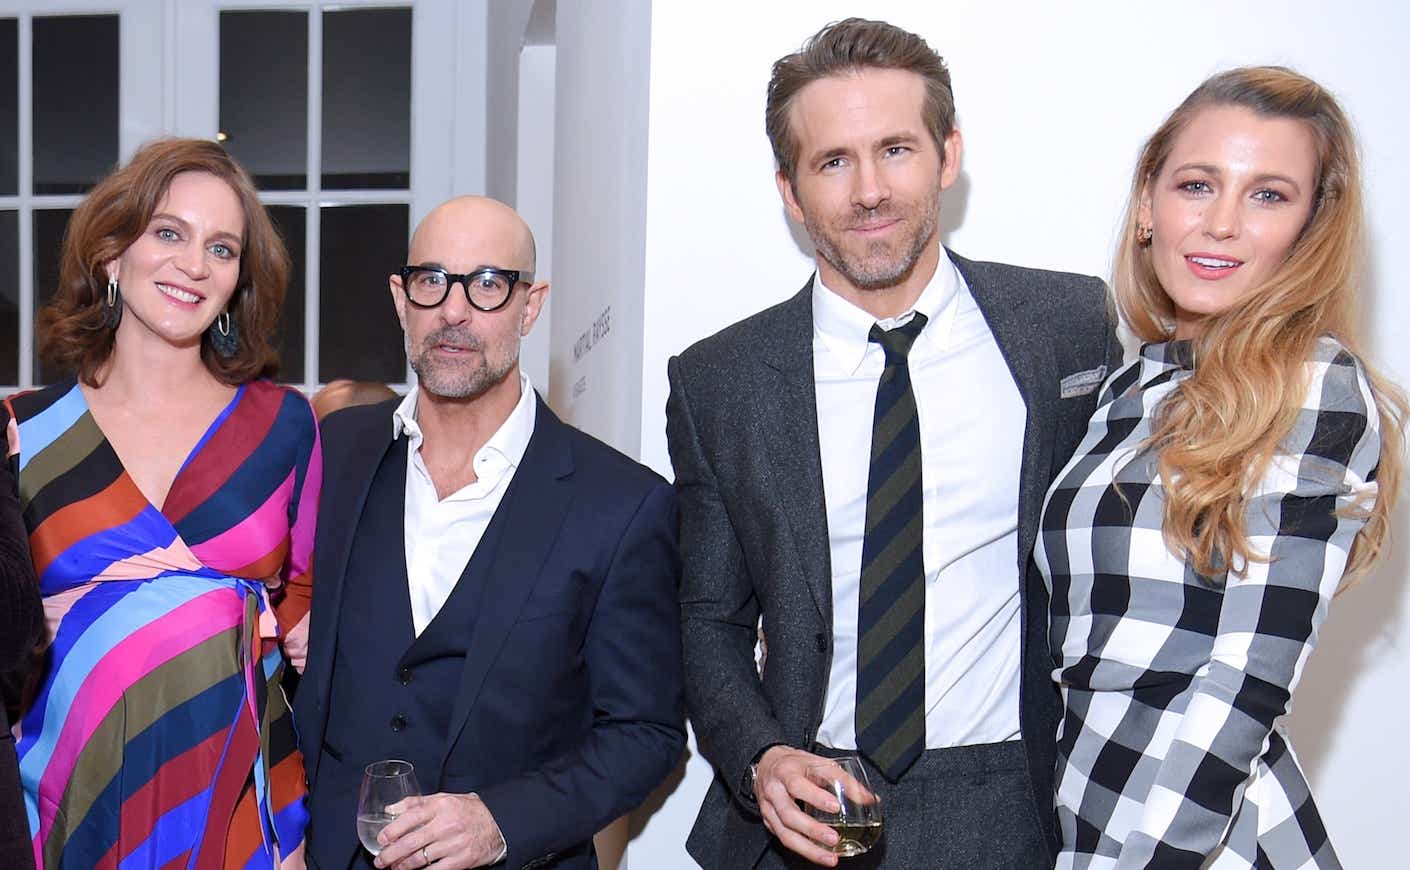 Stanley Tucci and Ryan Reynolds with their wives